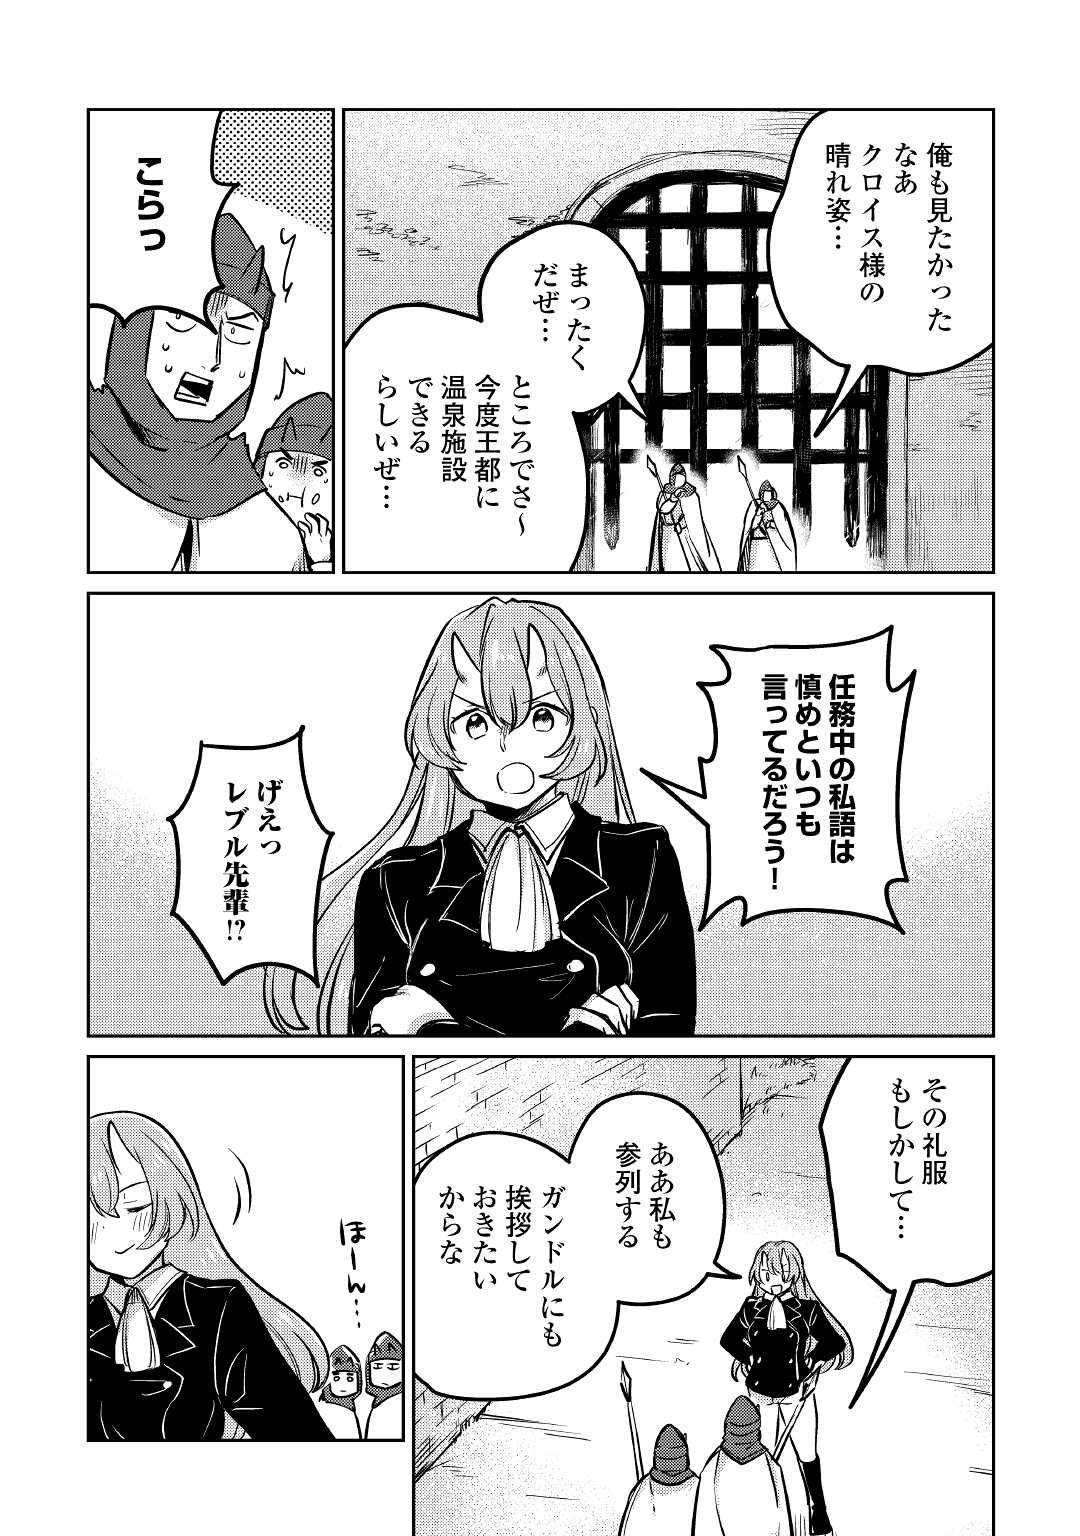 The Former Structural Researcher’s Story of Otherworldly Adventure 第40話 - Page 25